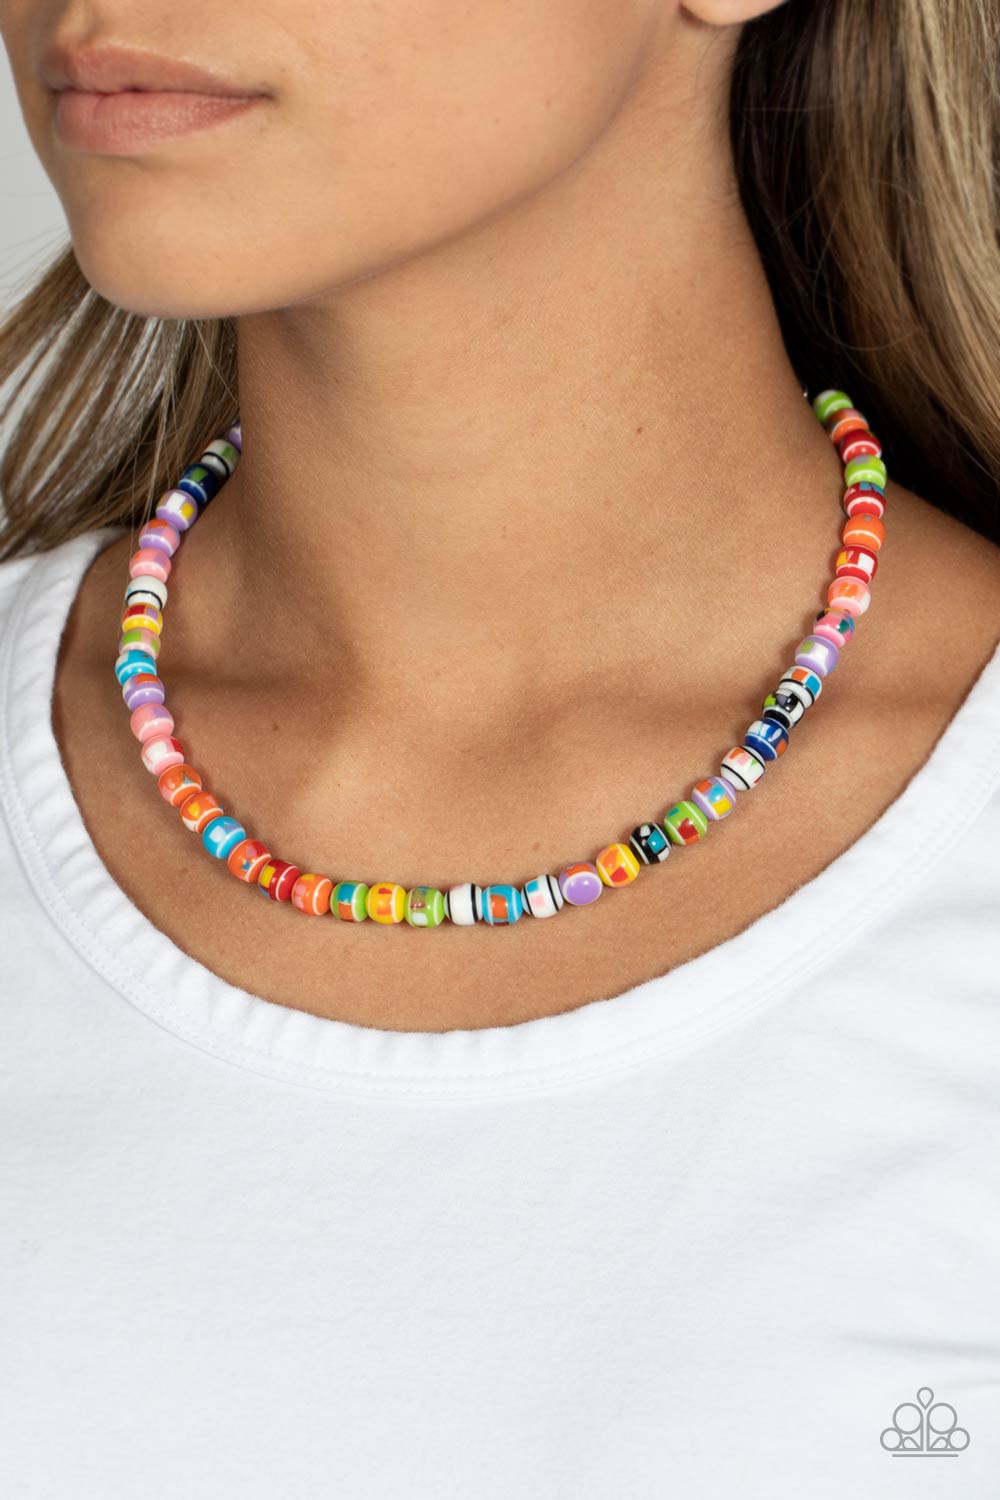 Gobstopper Glamour Multi Necklace - Paparazzi Accessories-on model - CarasShop.com - $5 Jewelry by Cara Jewels